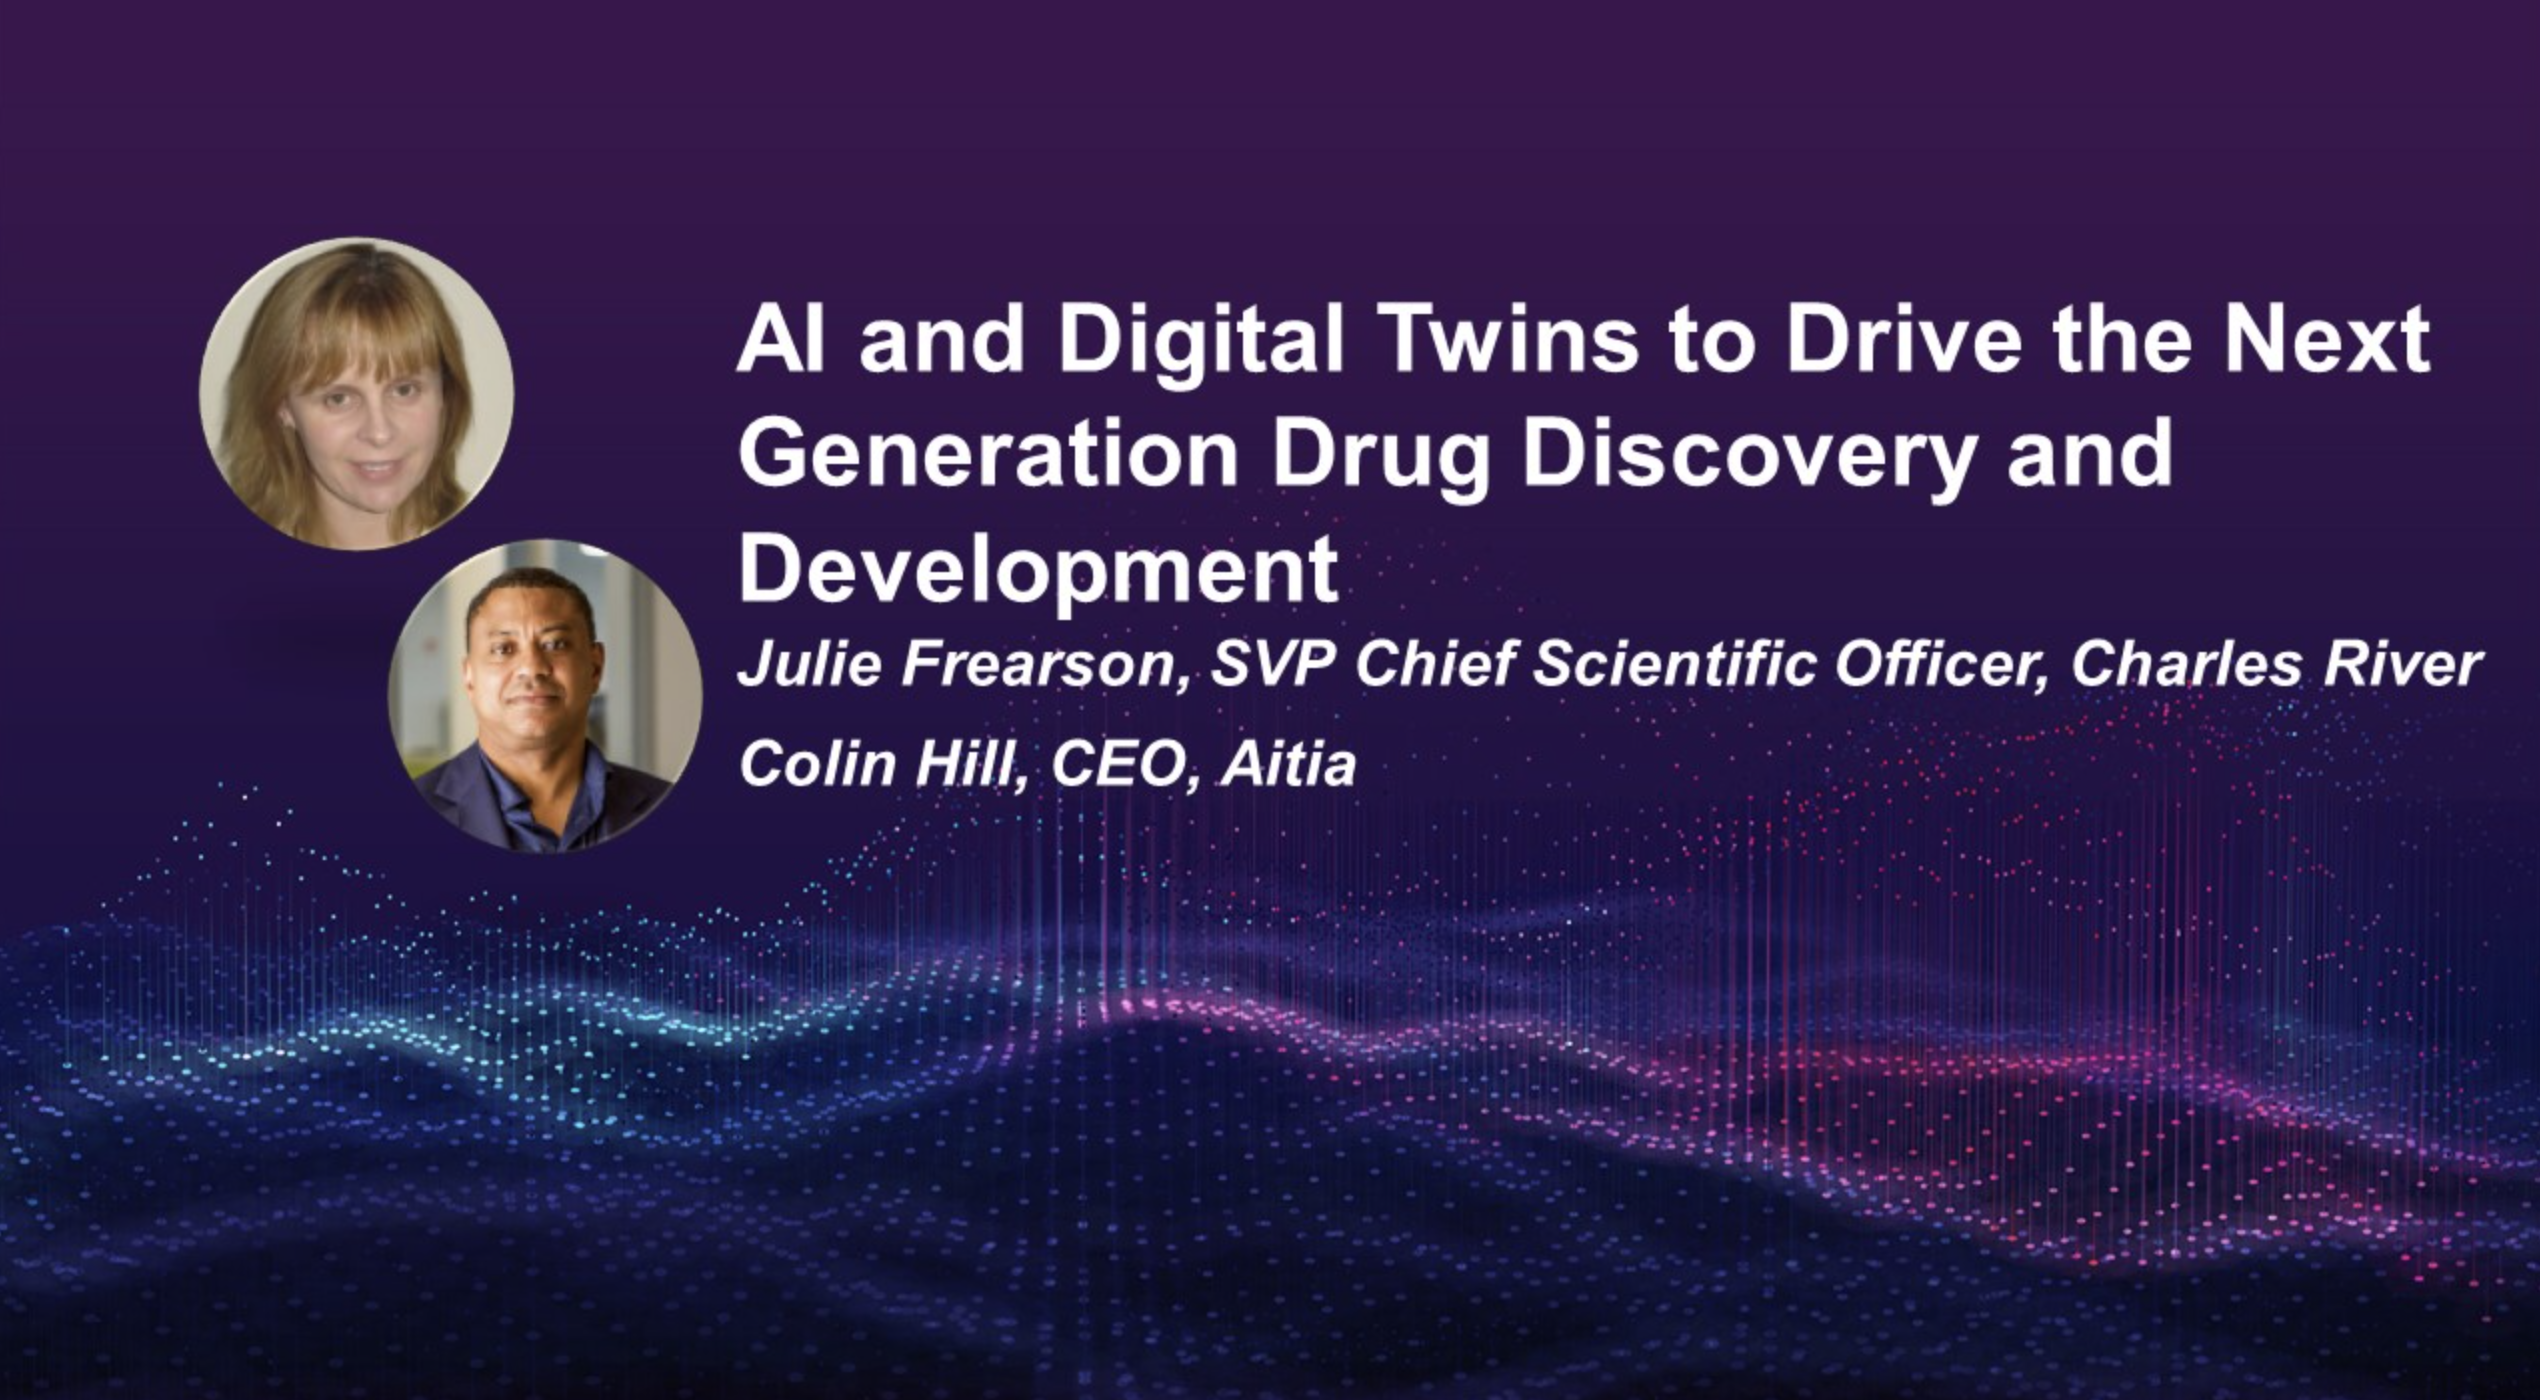 World Congress: AI and Digital Twins to Drive the Next Generation Drug Discovery and Development